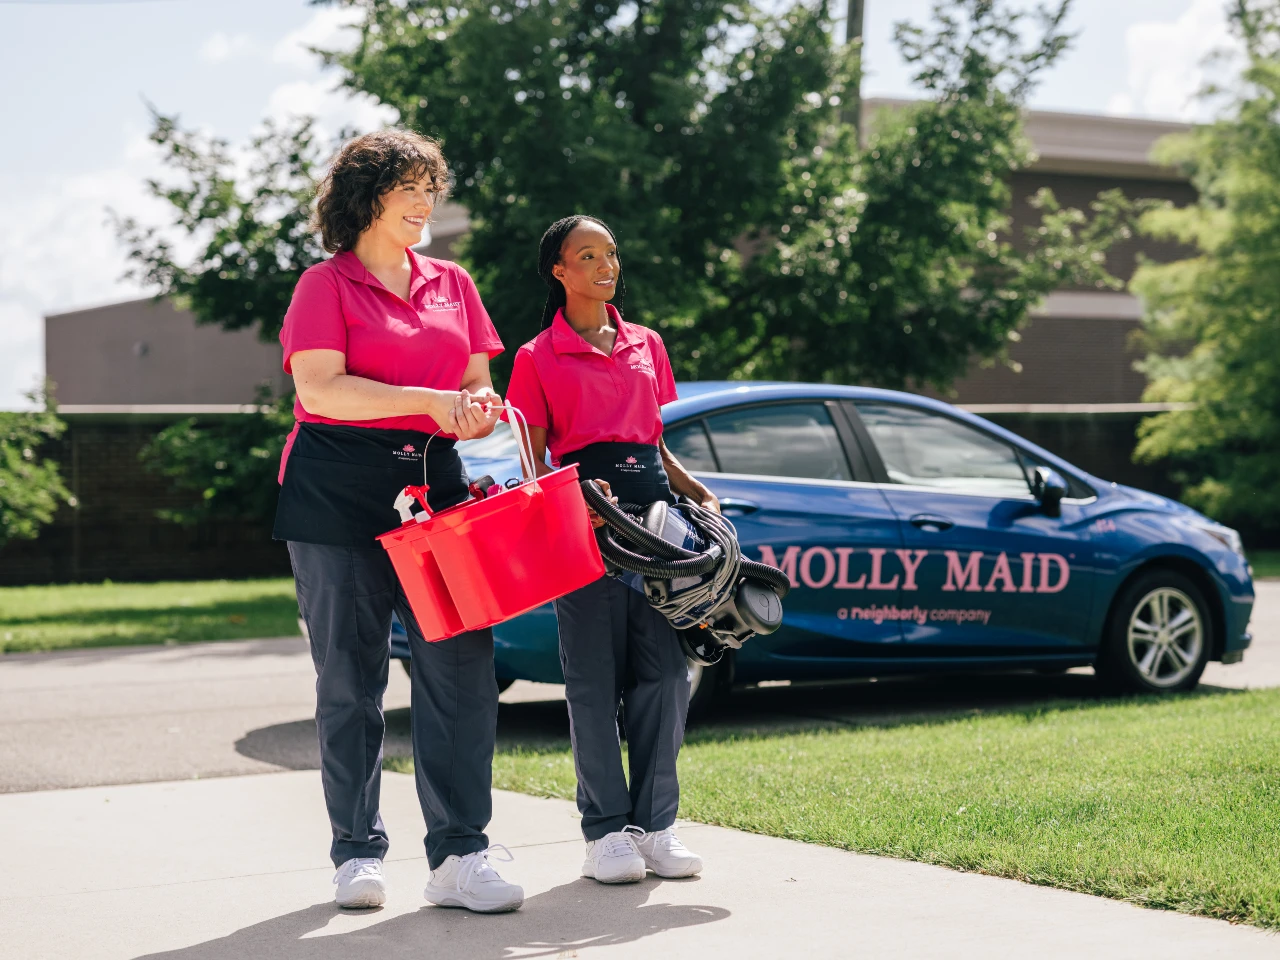 Happy Molly Maid employees at a customer's home.